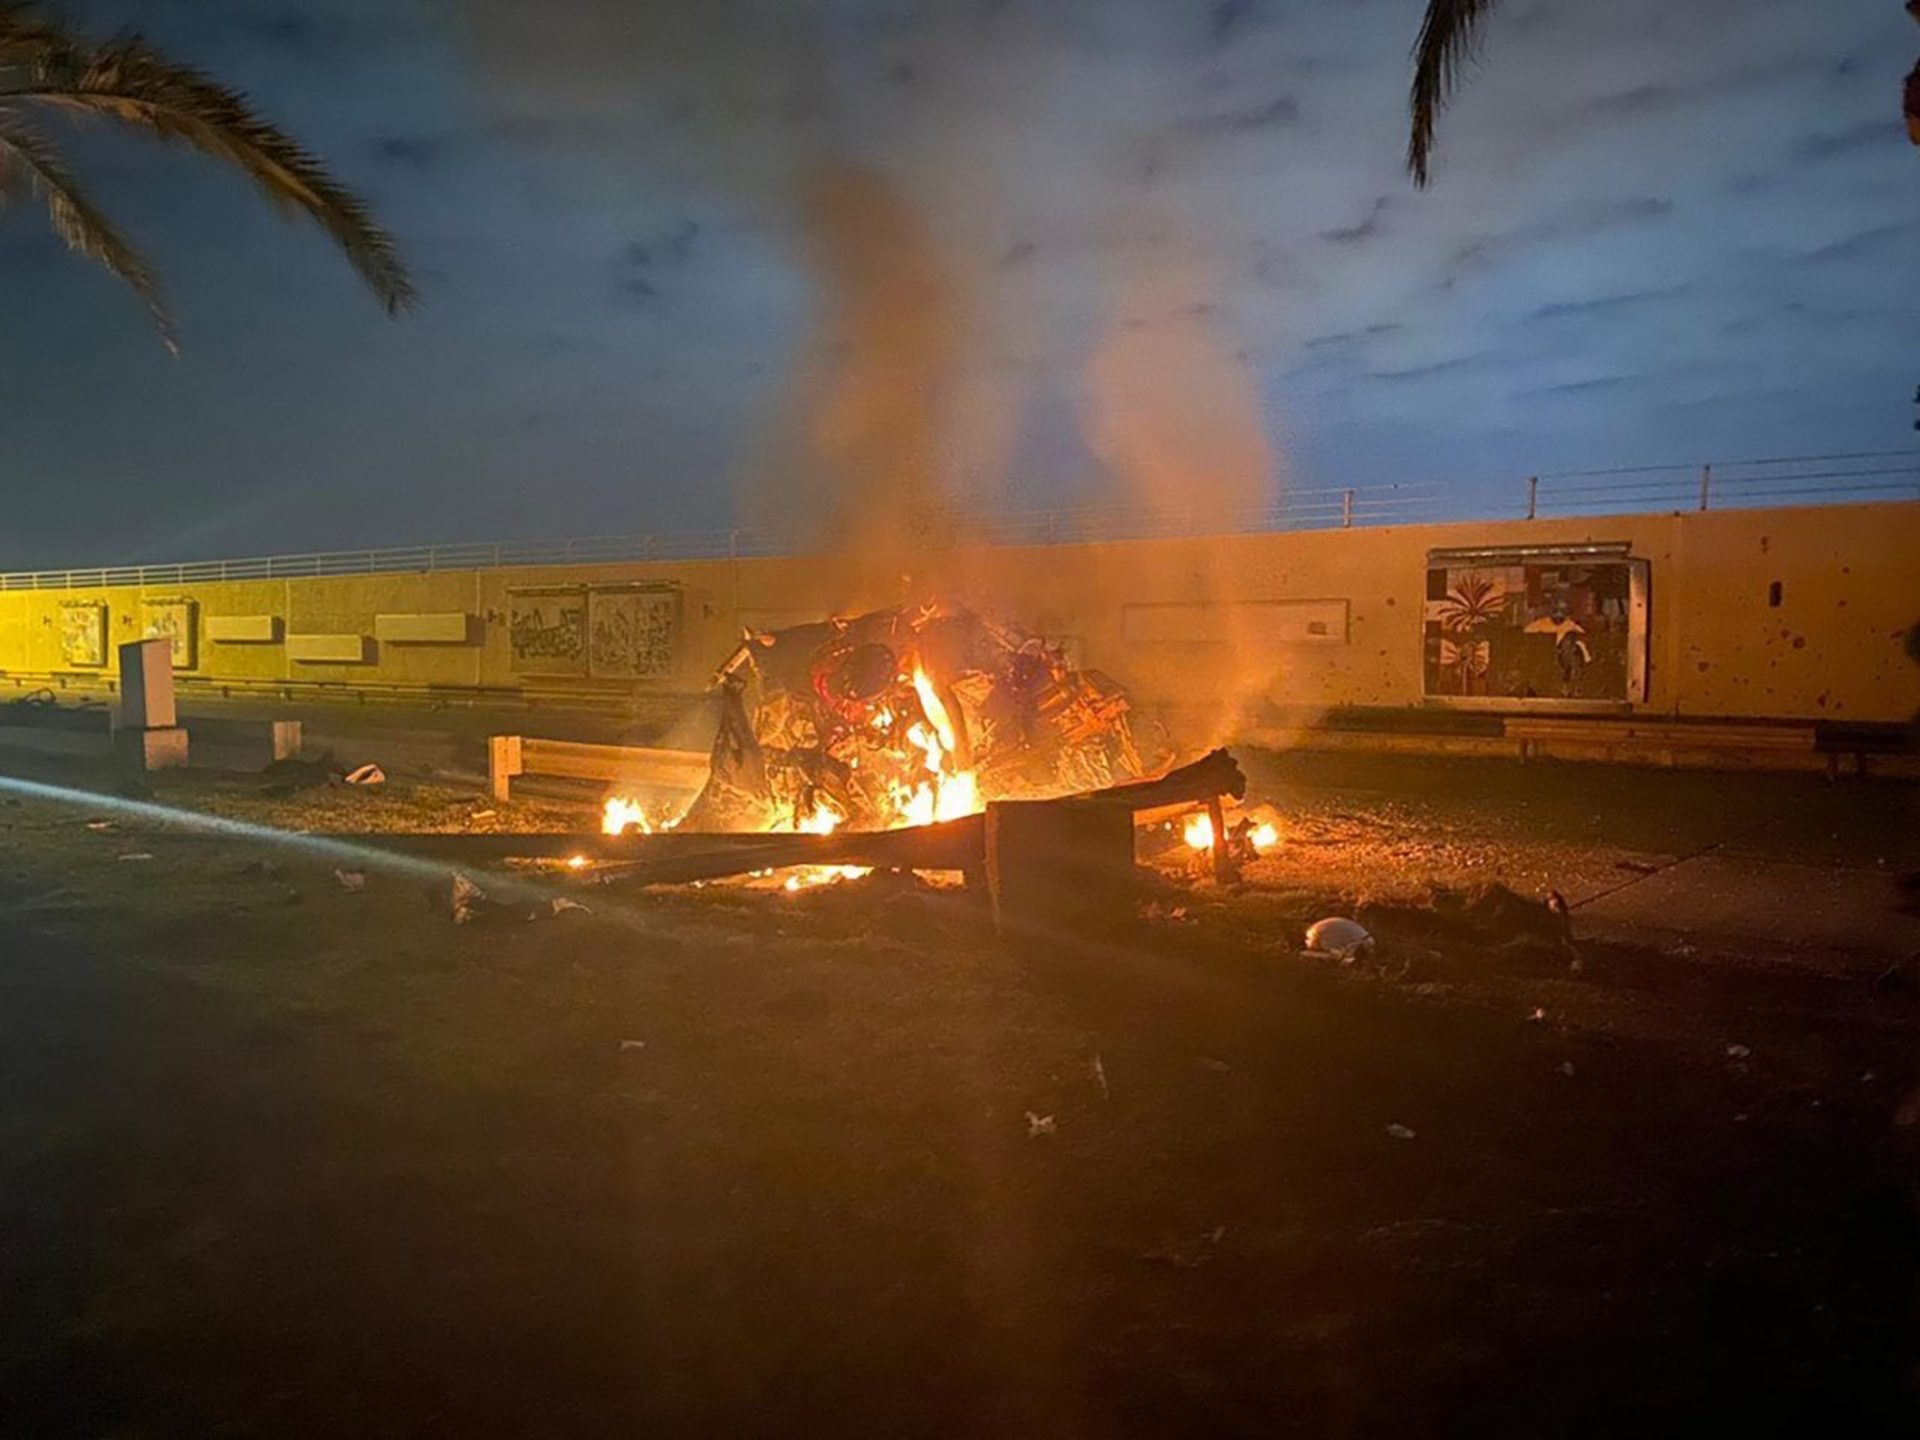 This photo released by the Iraqi Prime Minister Press Office shows a burning vehicle at the Baghdad International Airport following an airstrike in Baghdad, Iraq, early Friday, Jan. 3, 2020. The Pentagon said Thursday that the U.S. military has killed Gen. Qassem Soleimani, the head of Iran's elite Quds Force, at the direction of President Donald Trump.